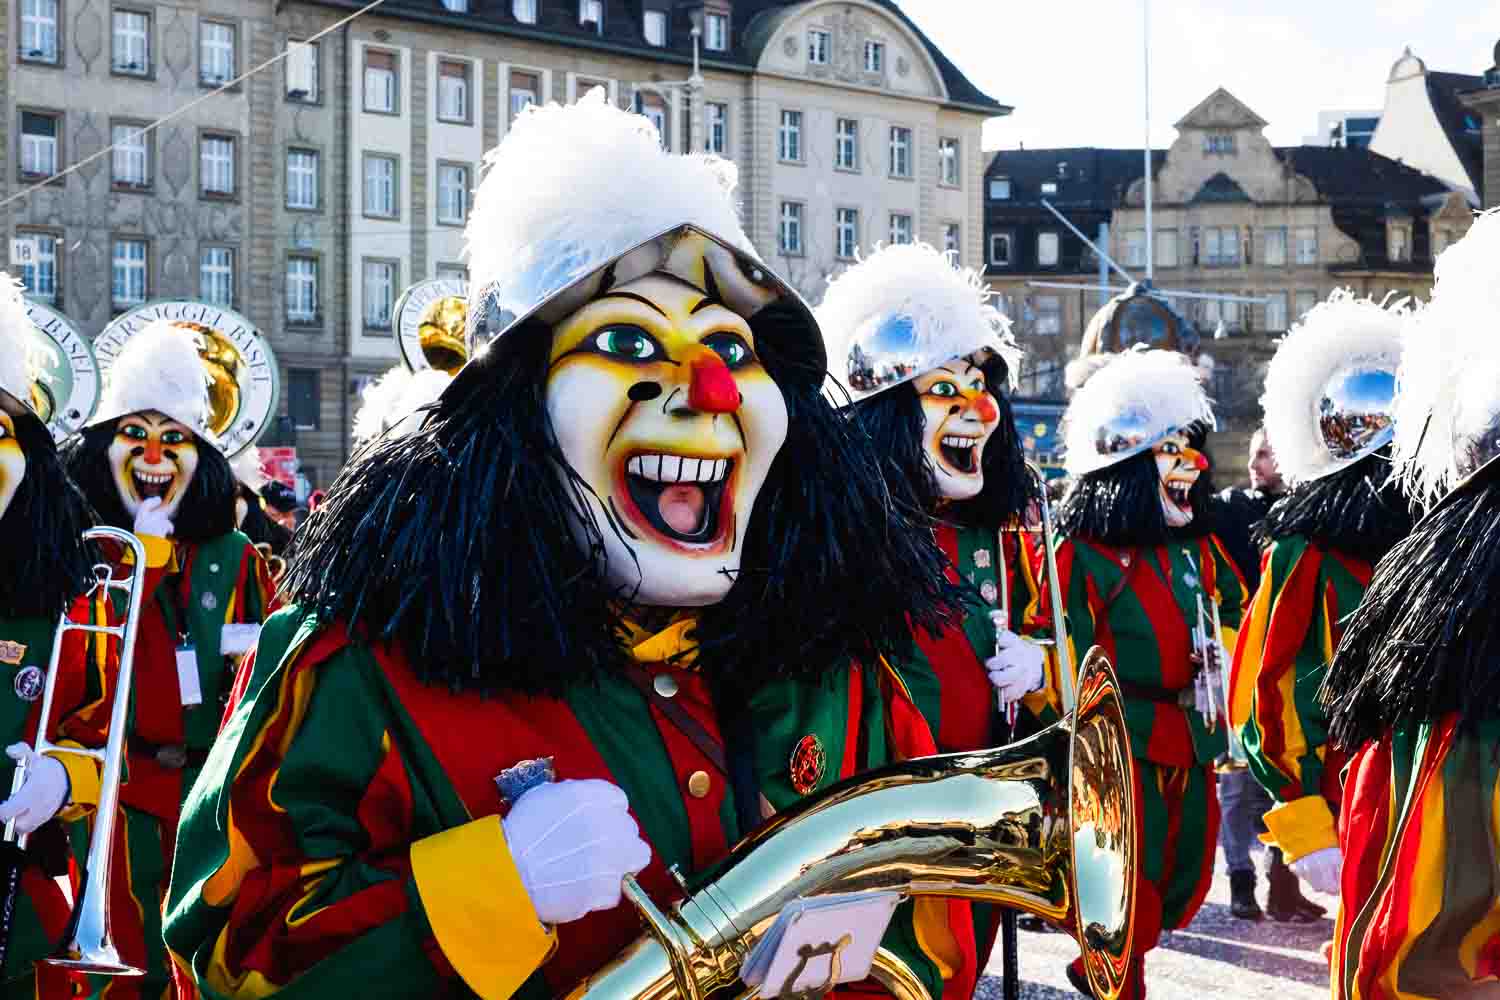 Fall in Love with Basel during Fasnacht, Switzerland’s Largest Carnival